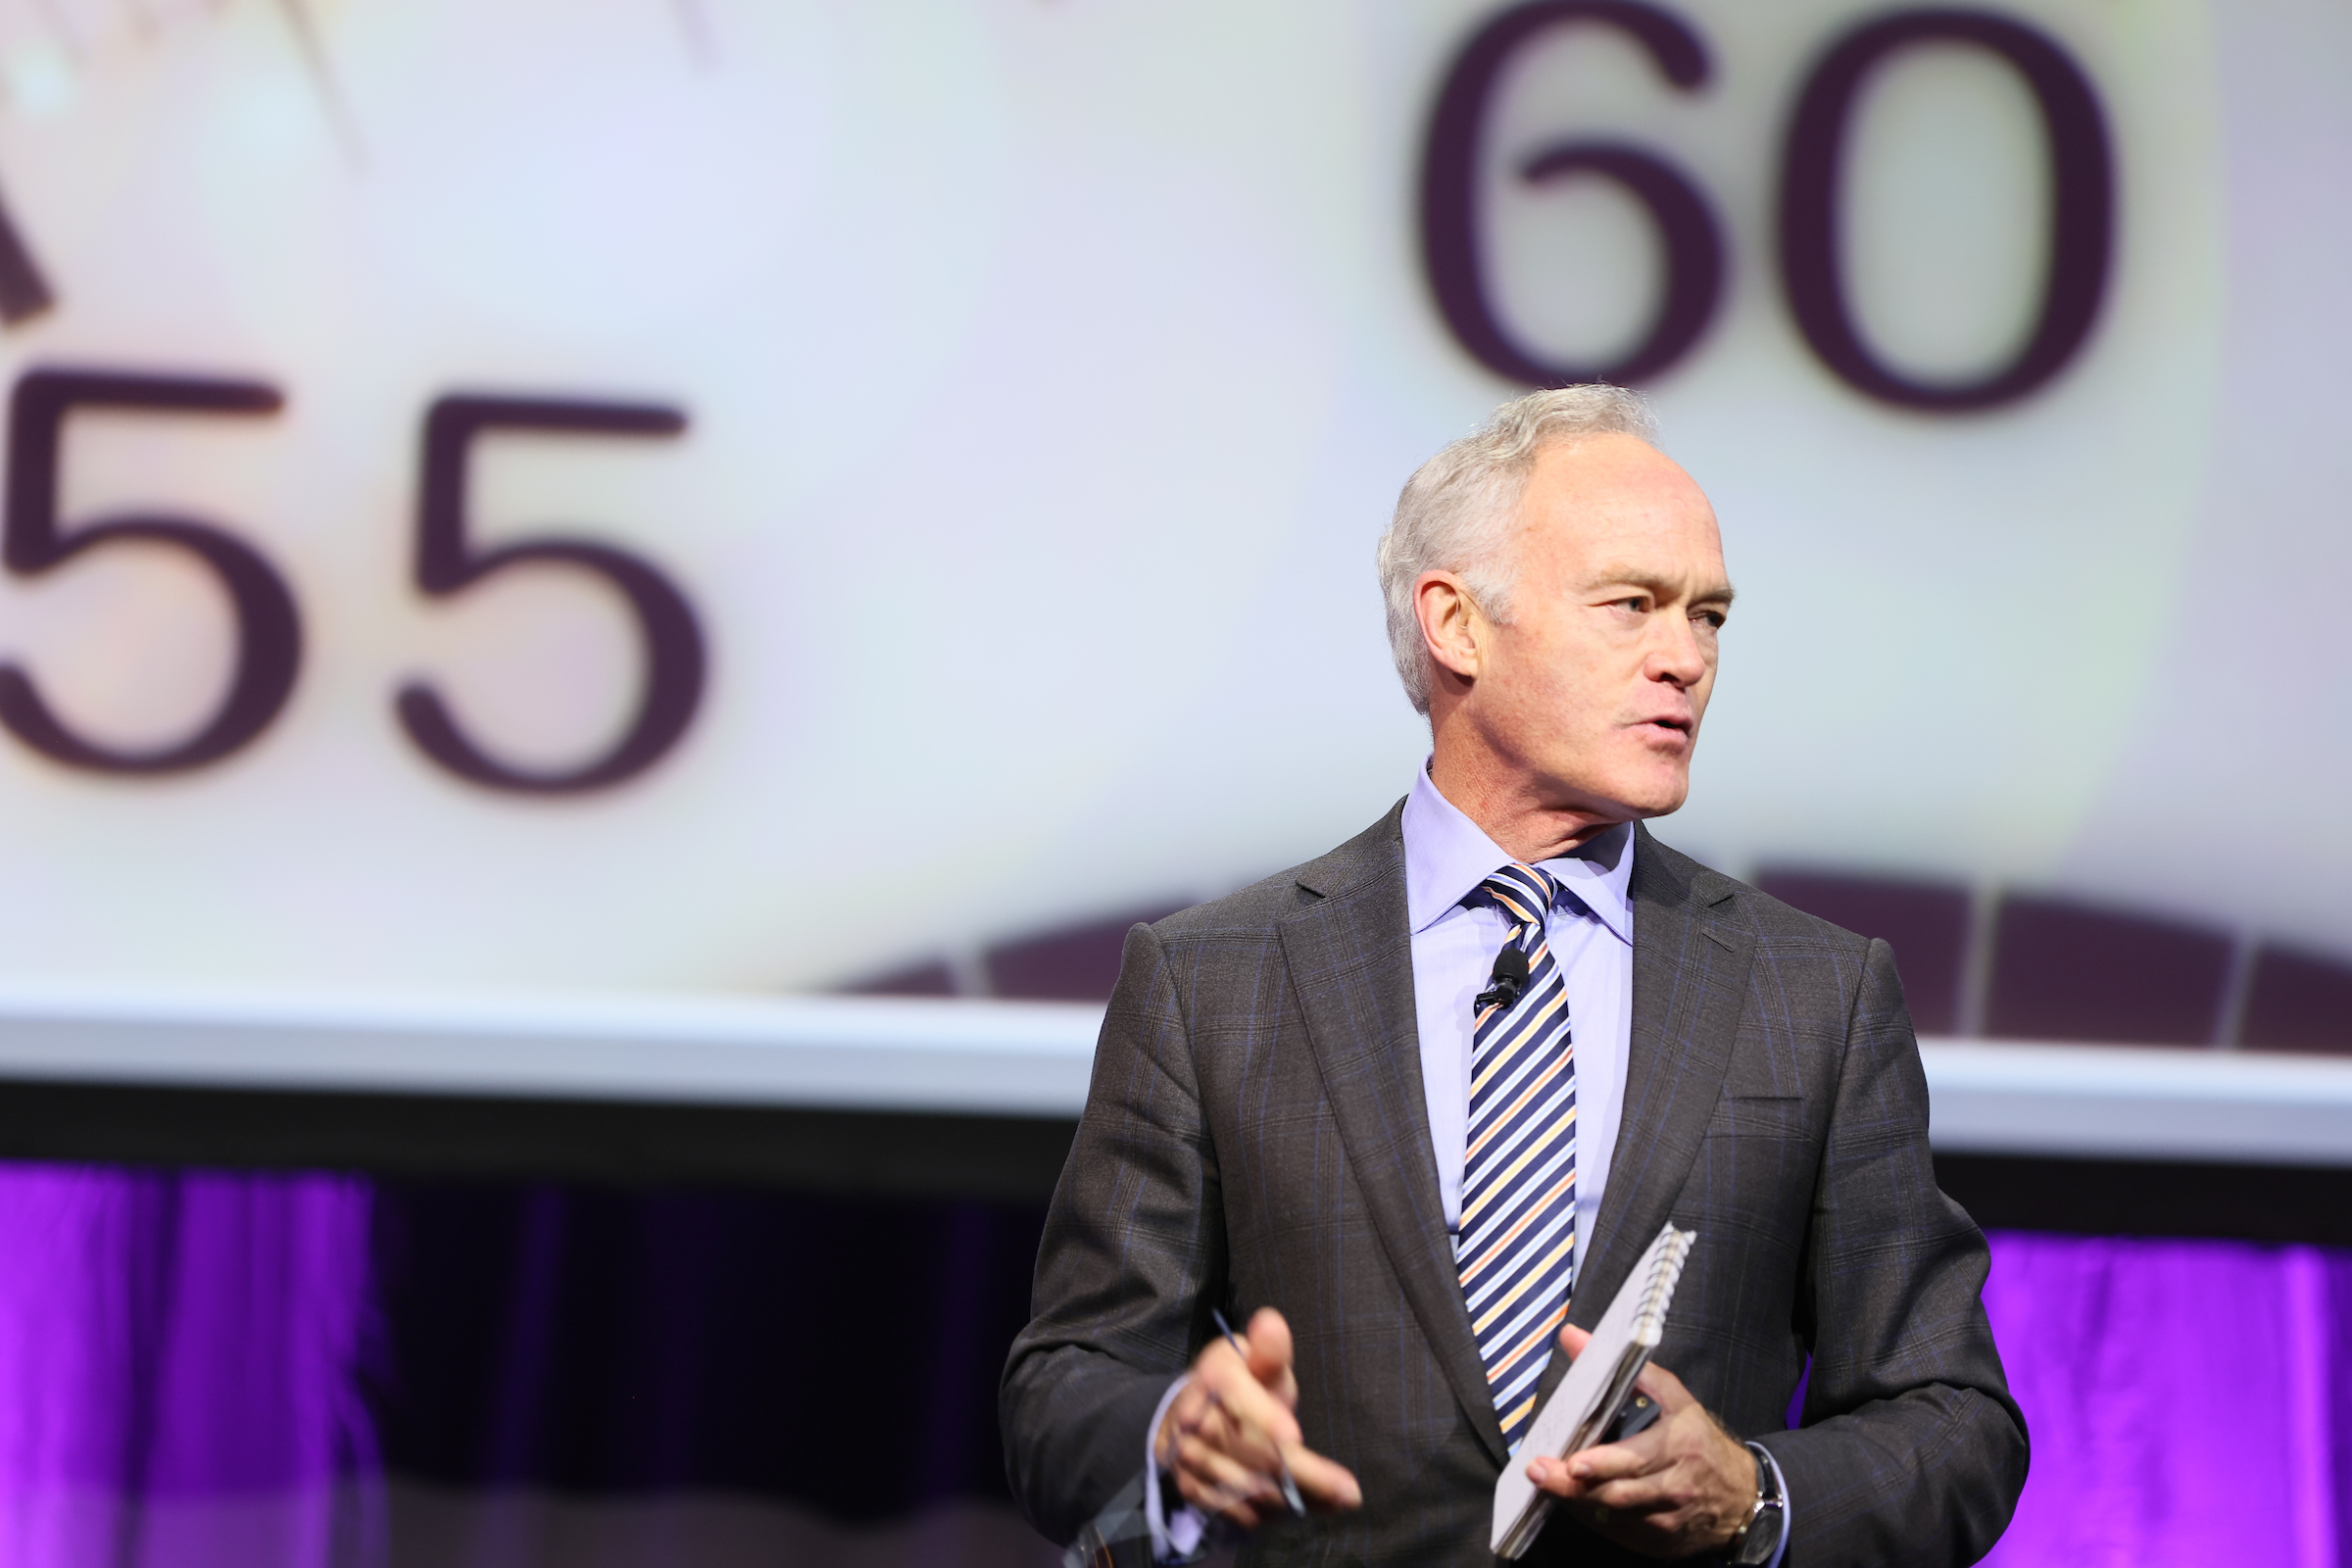 2023 General Session "Truth Worth Telling" featuring speaker Scott Pelley.